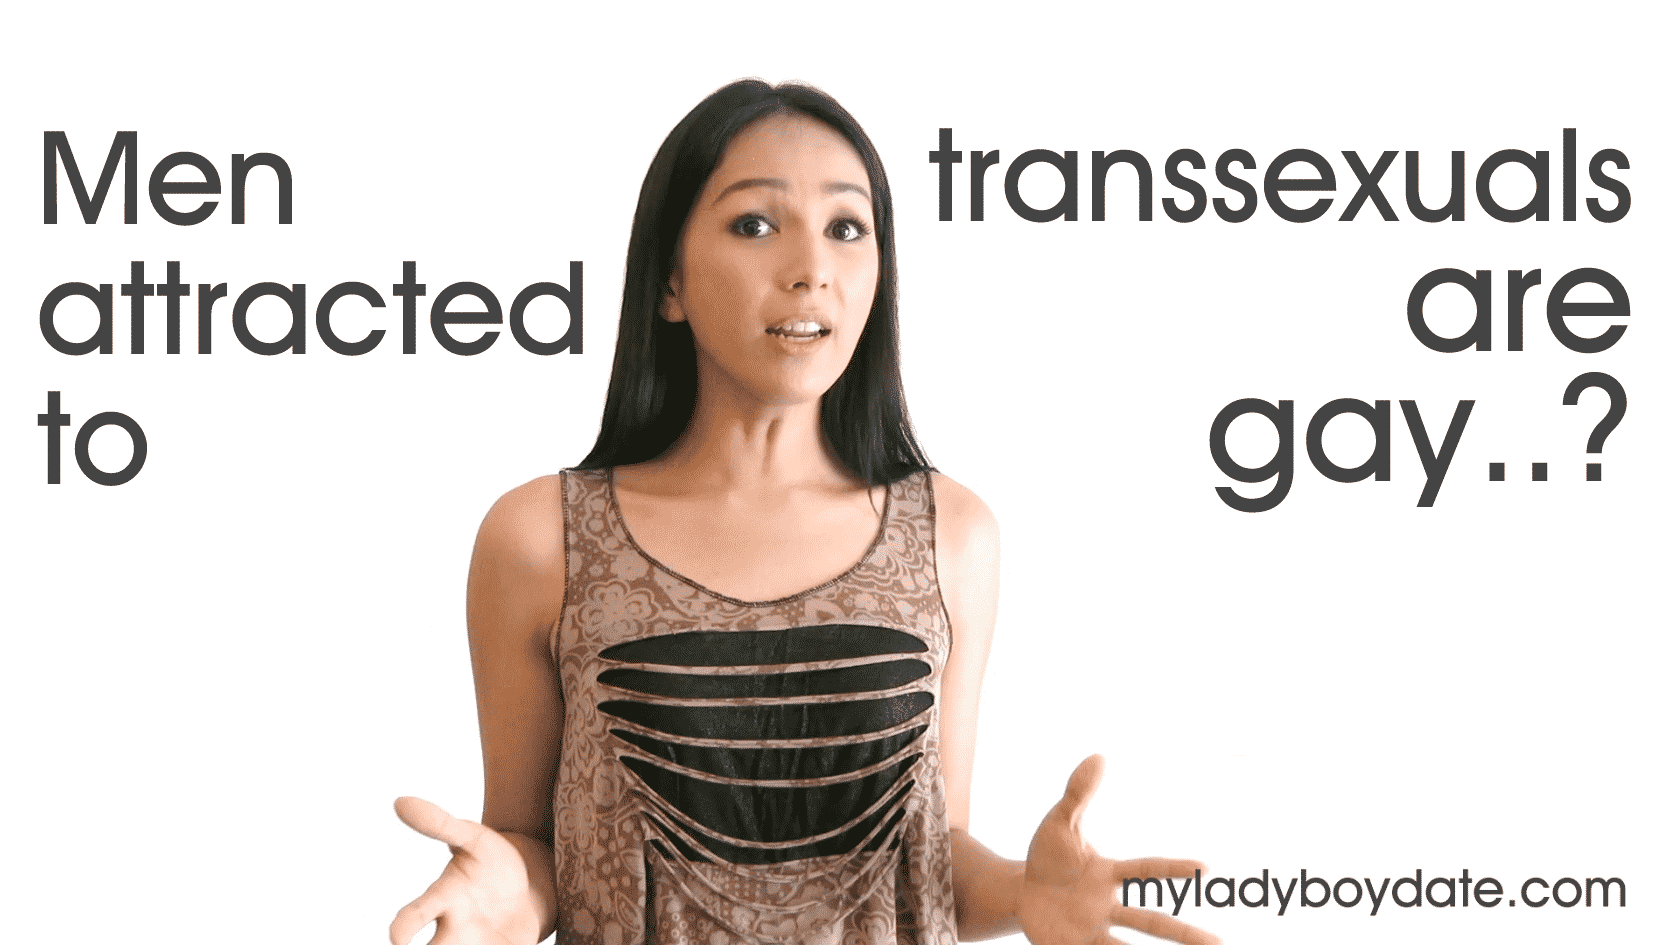 Are men who are attracted to trans women, gay? image